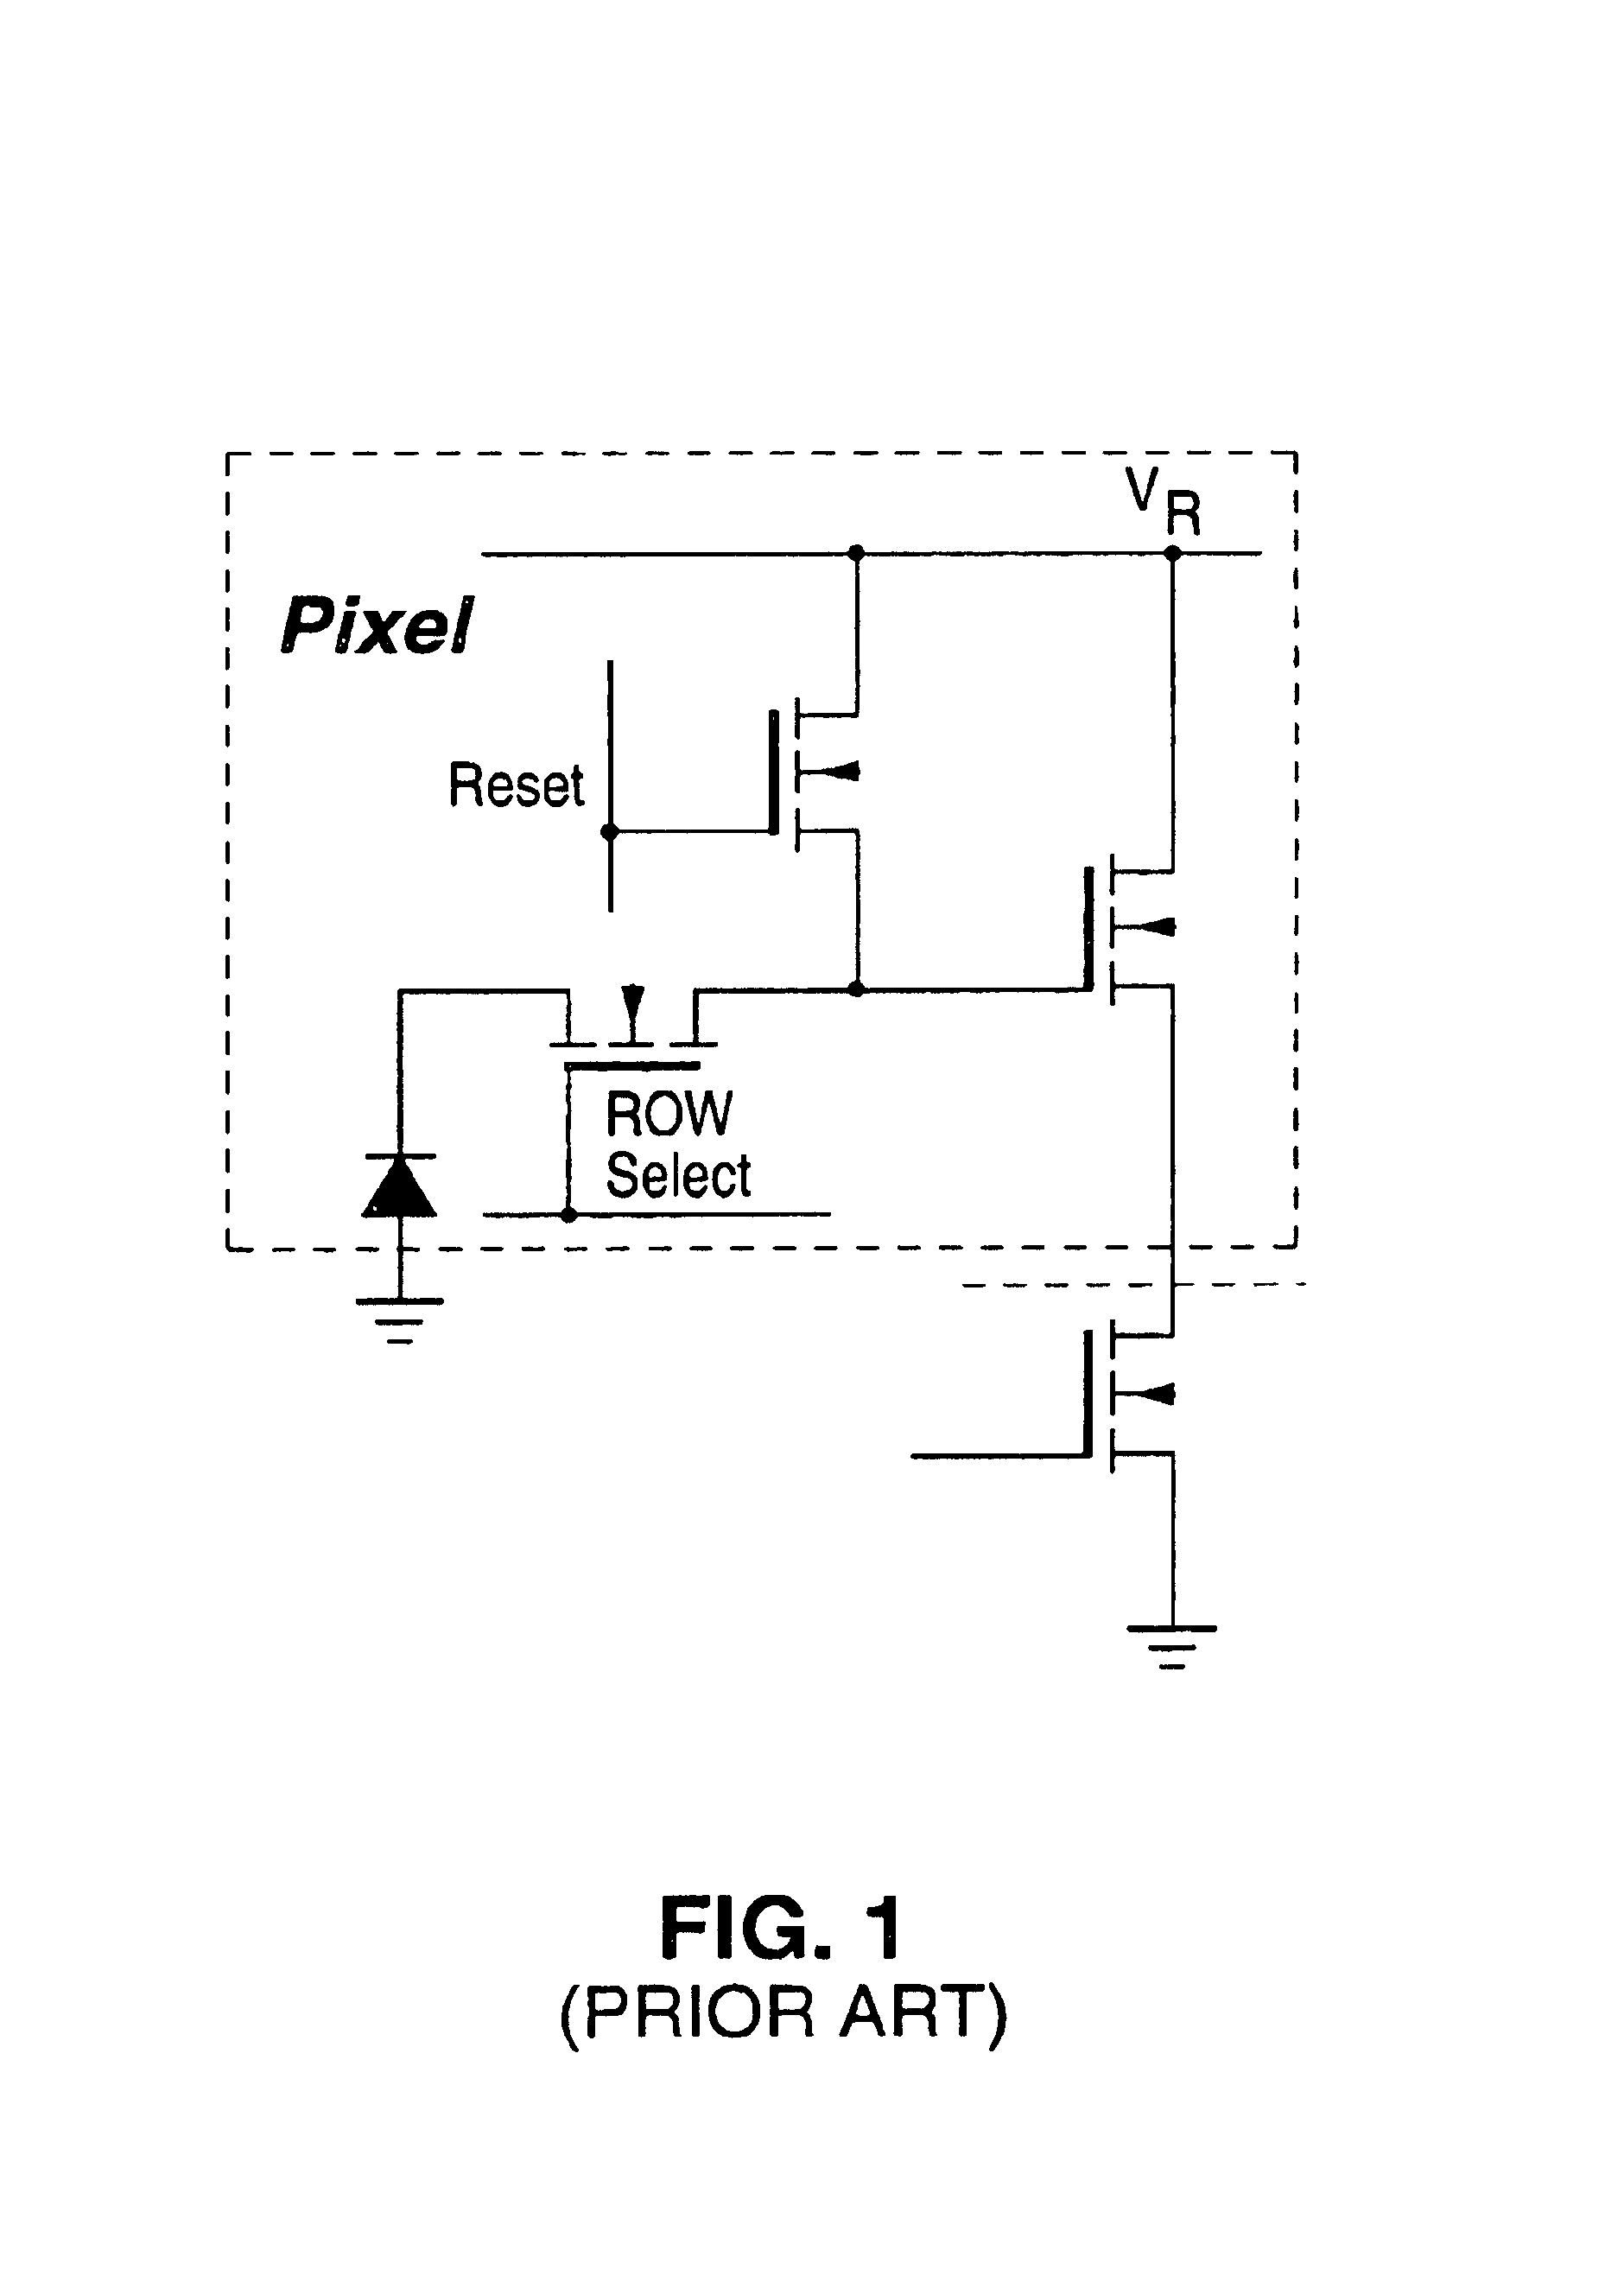 Compact active pixel with low-noise image formation